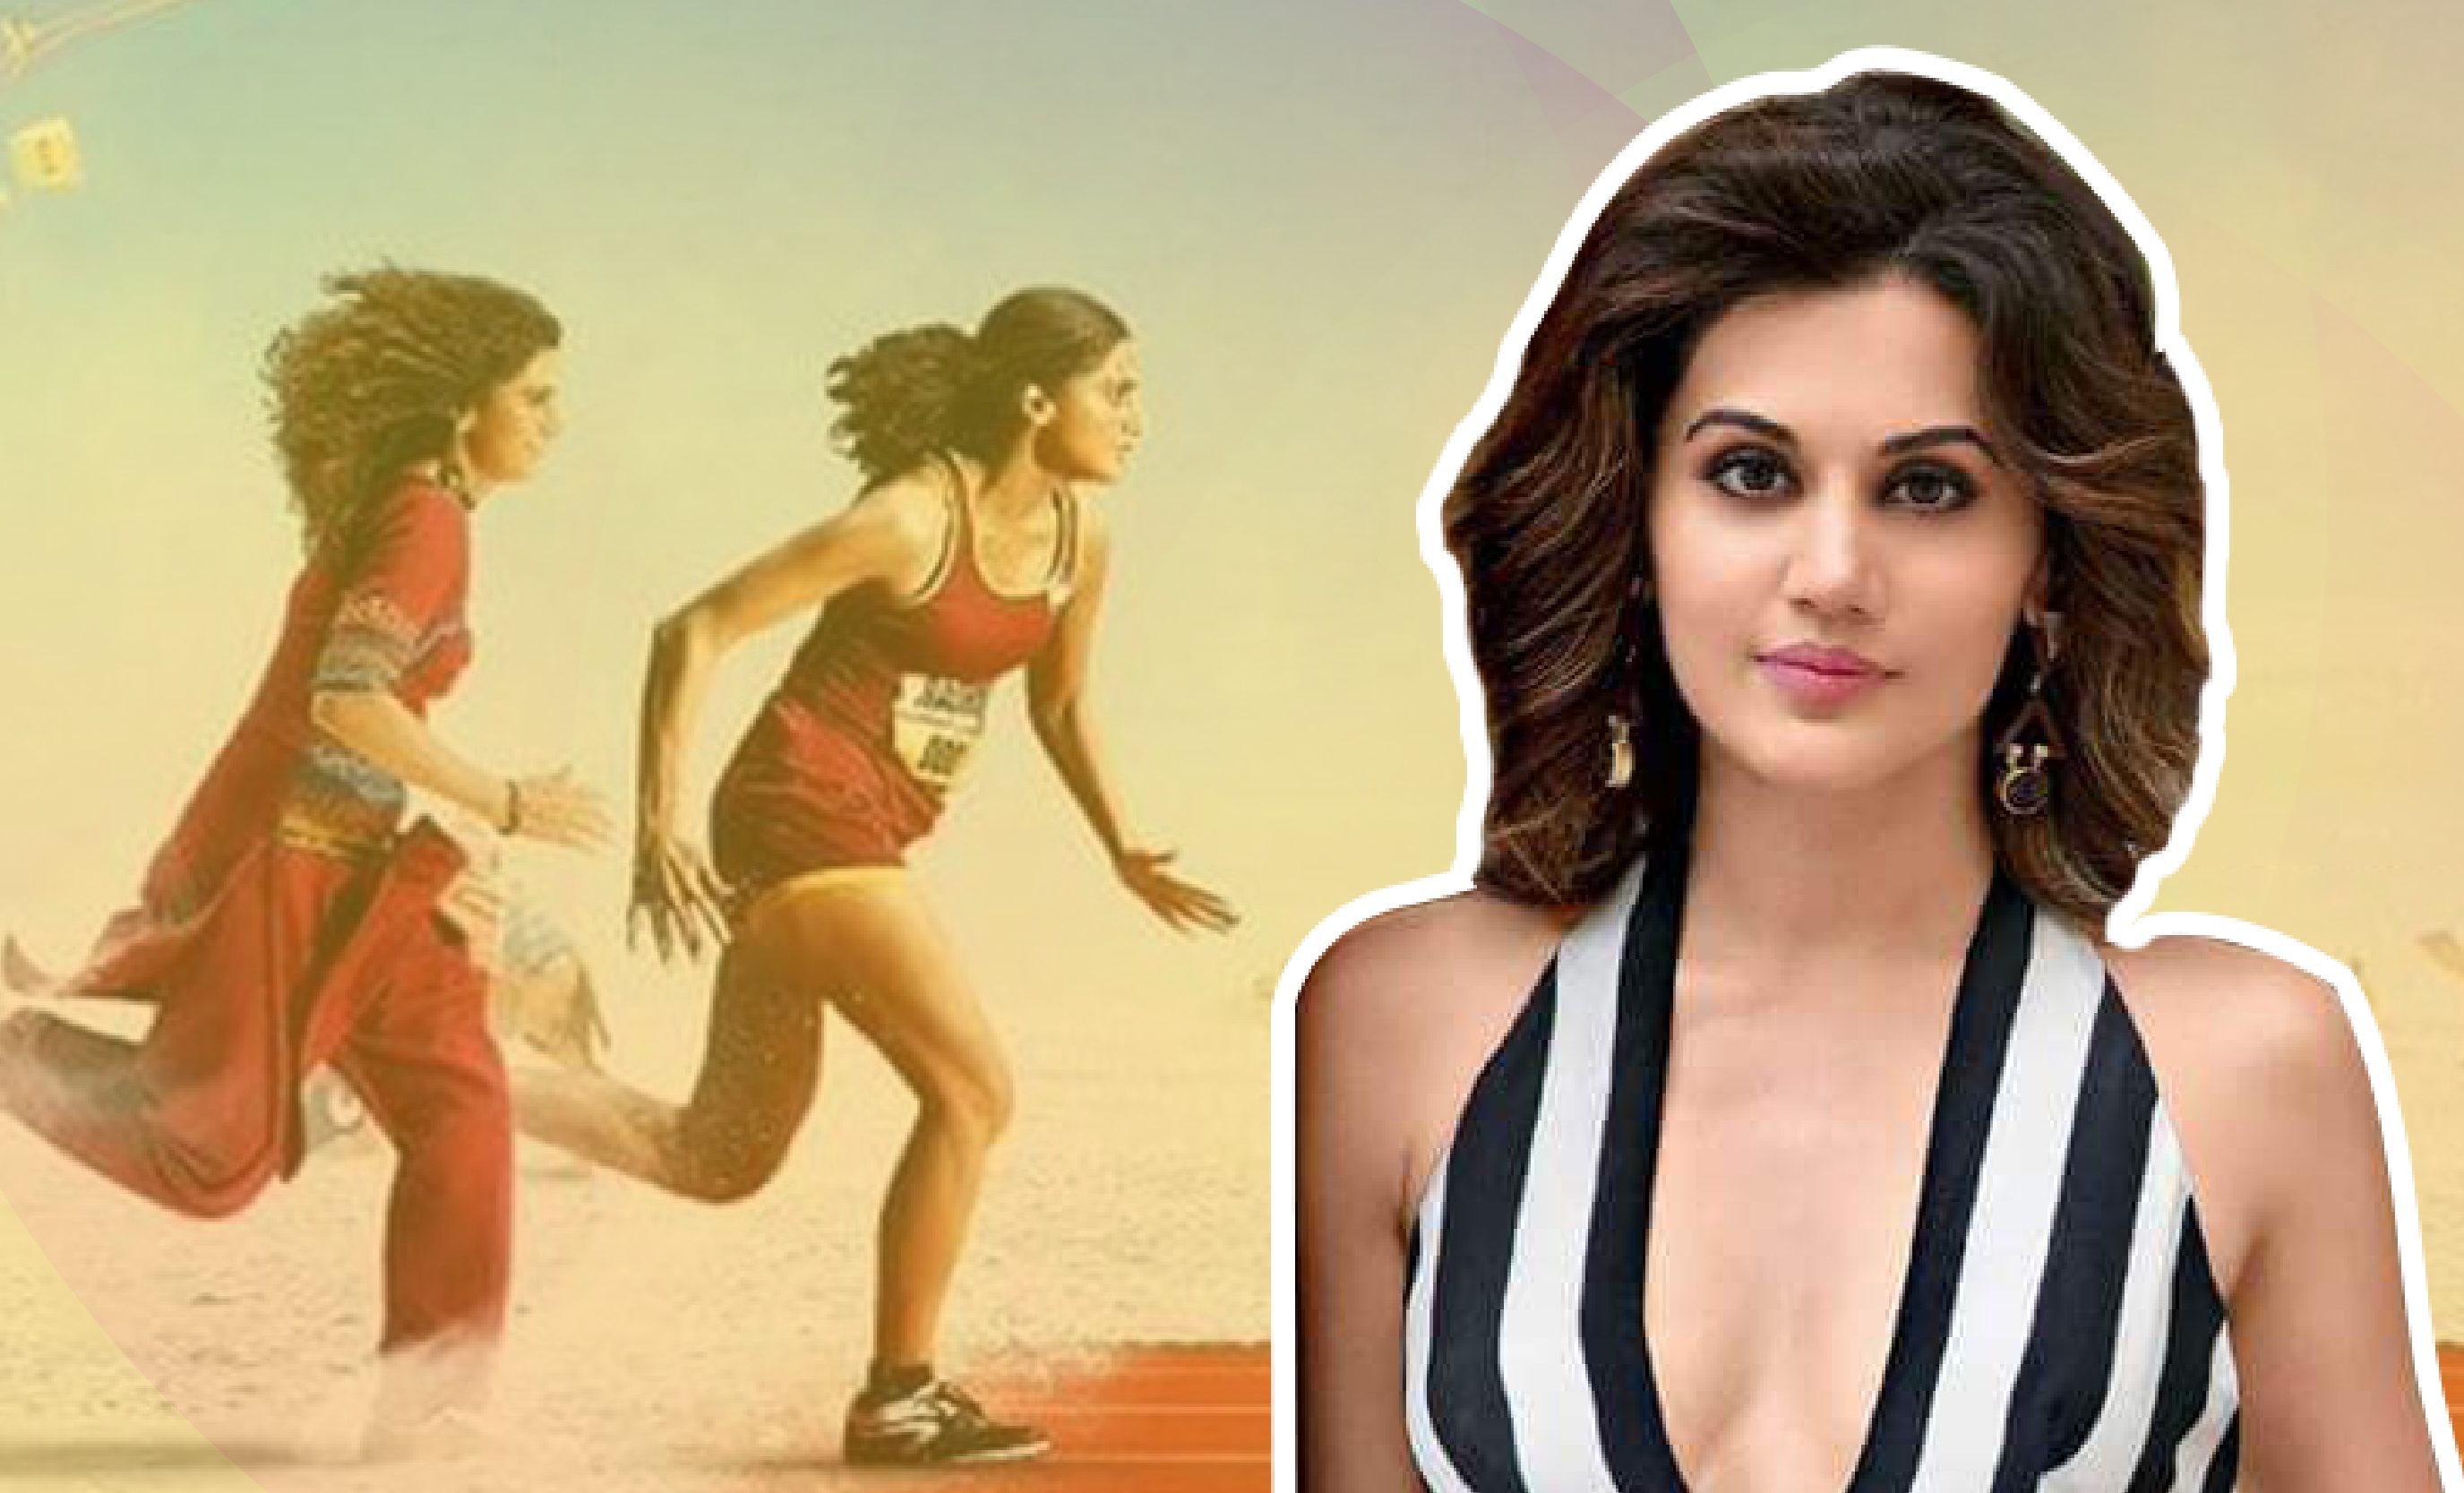 Taapsee Pannu Says That Women Don’t Have The Freedom Of Being Themselves, Reveals Why She Did Rashmi Rocket